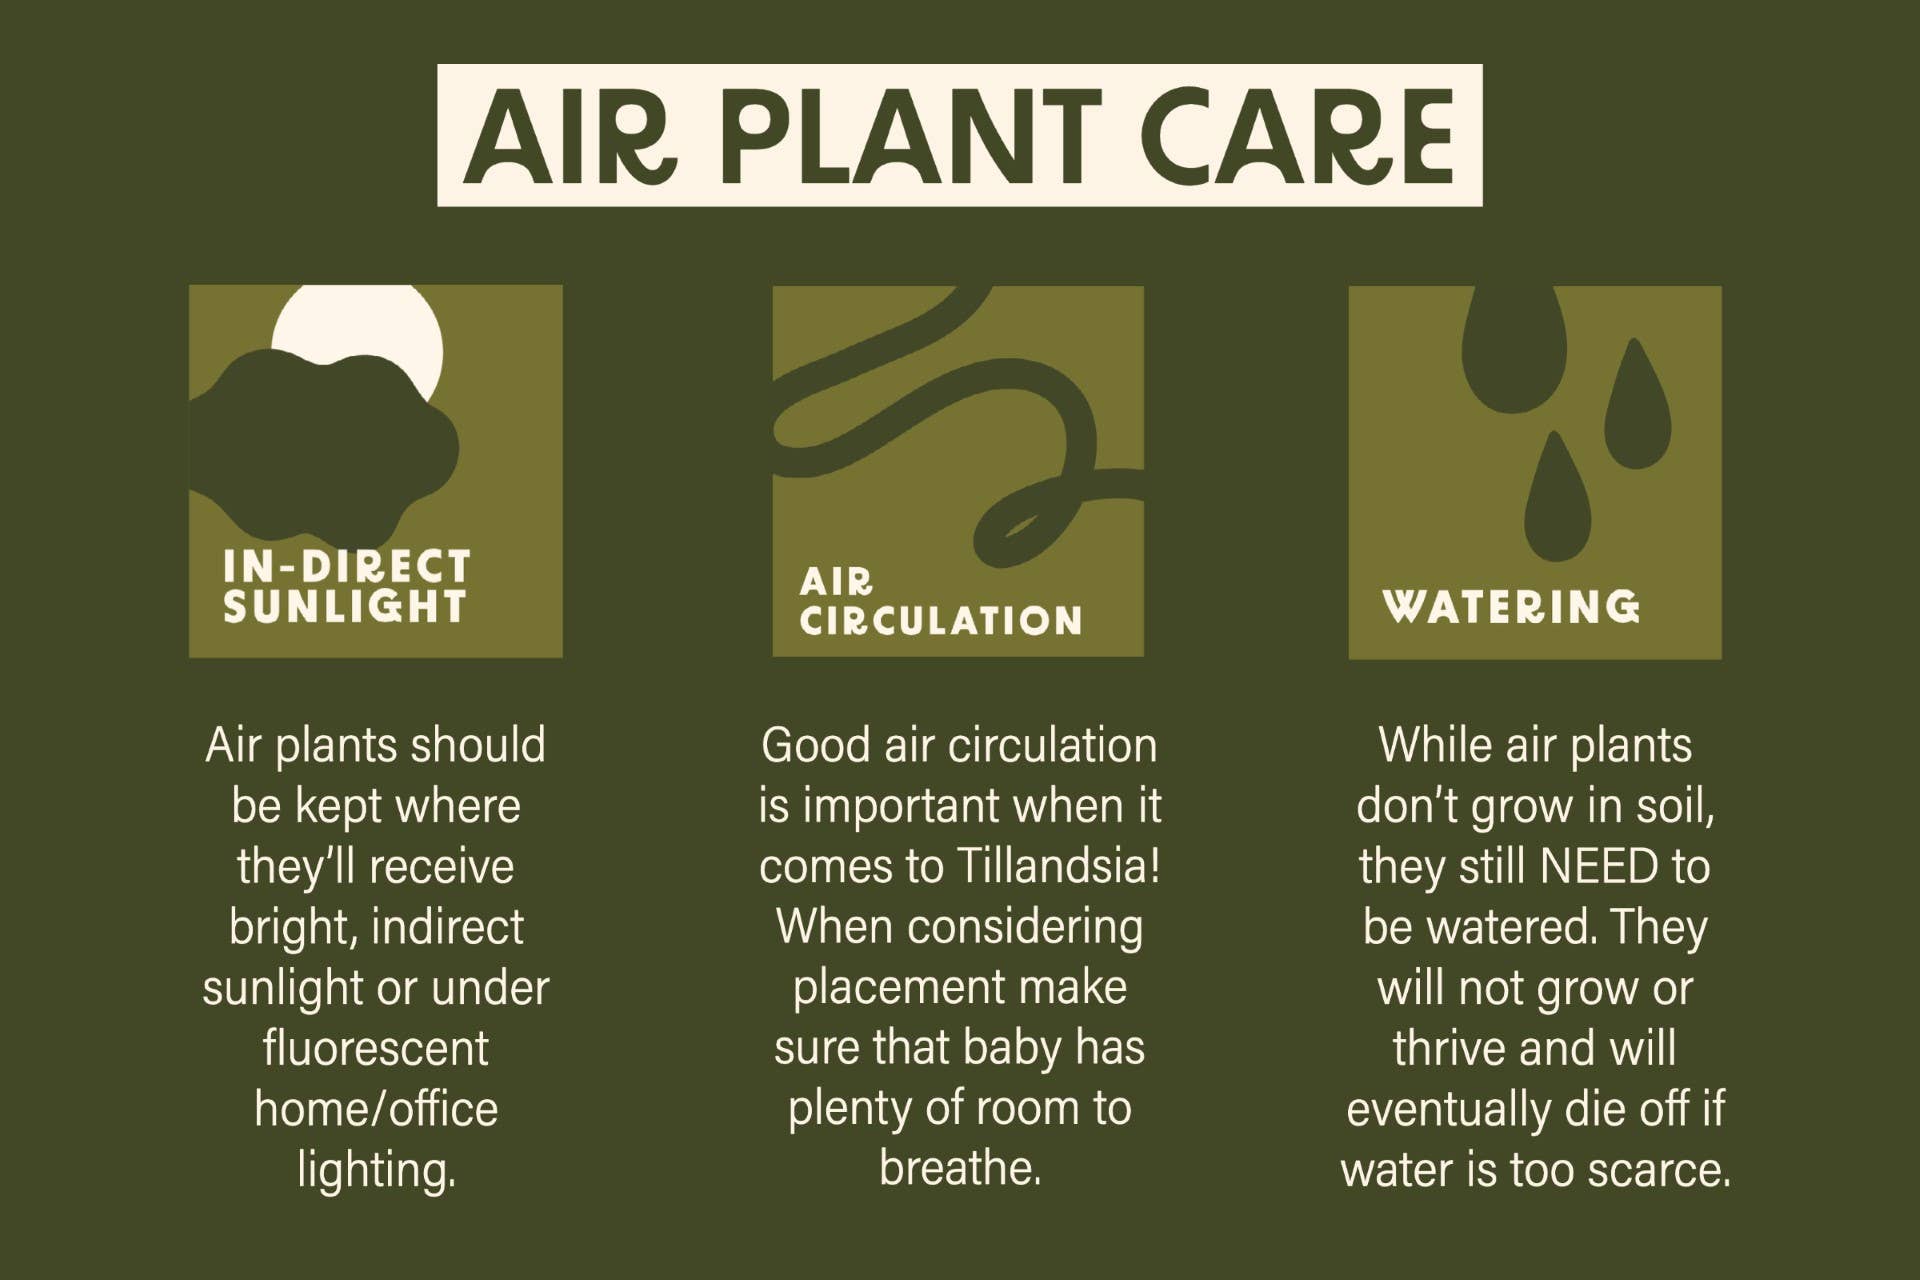 An informative infographic on the care and maintenance of Ionantha Air Plants, highlighting their unique adaptation for surviving in diverse environmental climates through CAM photosynthesis.